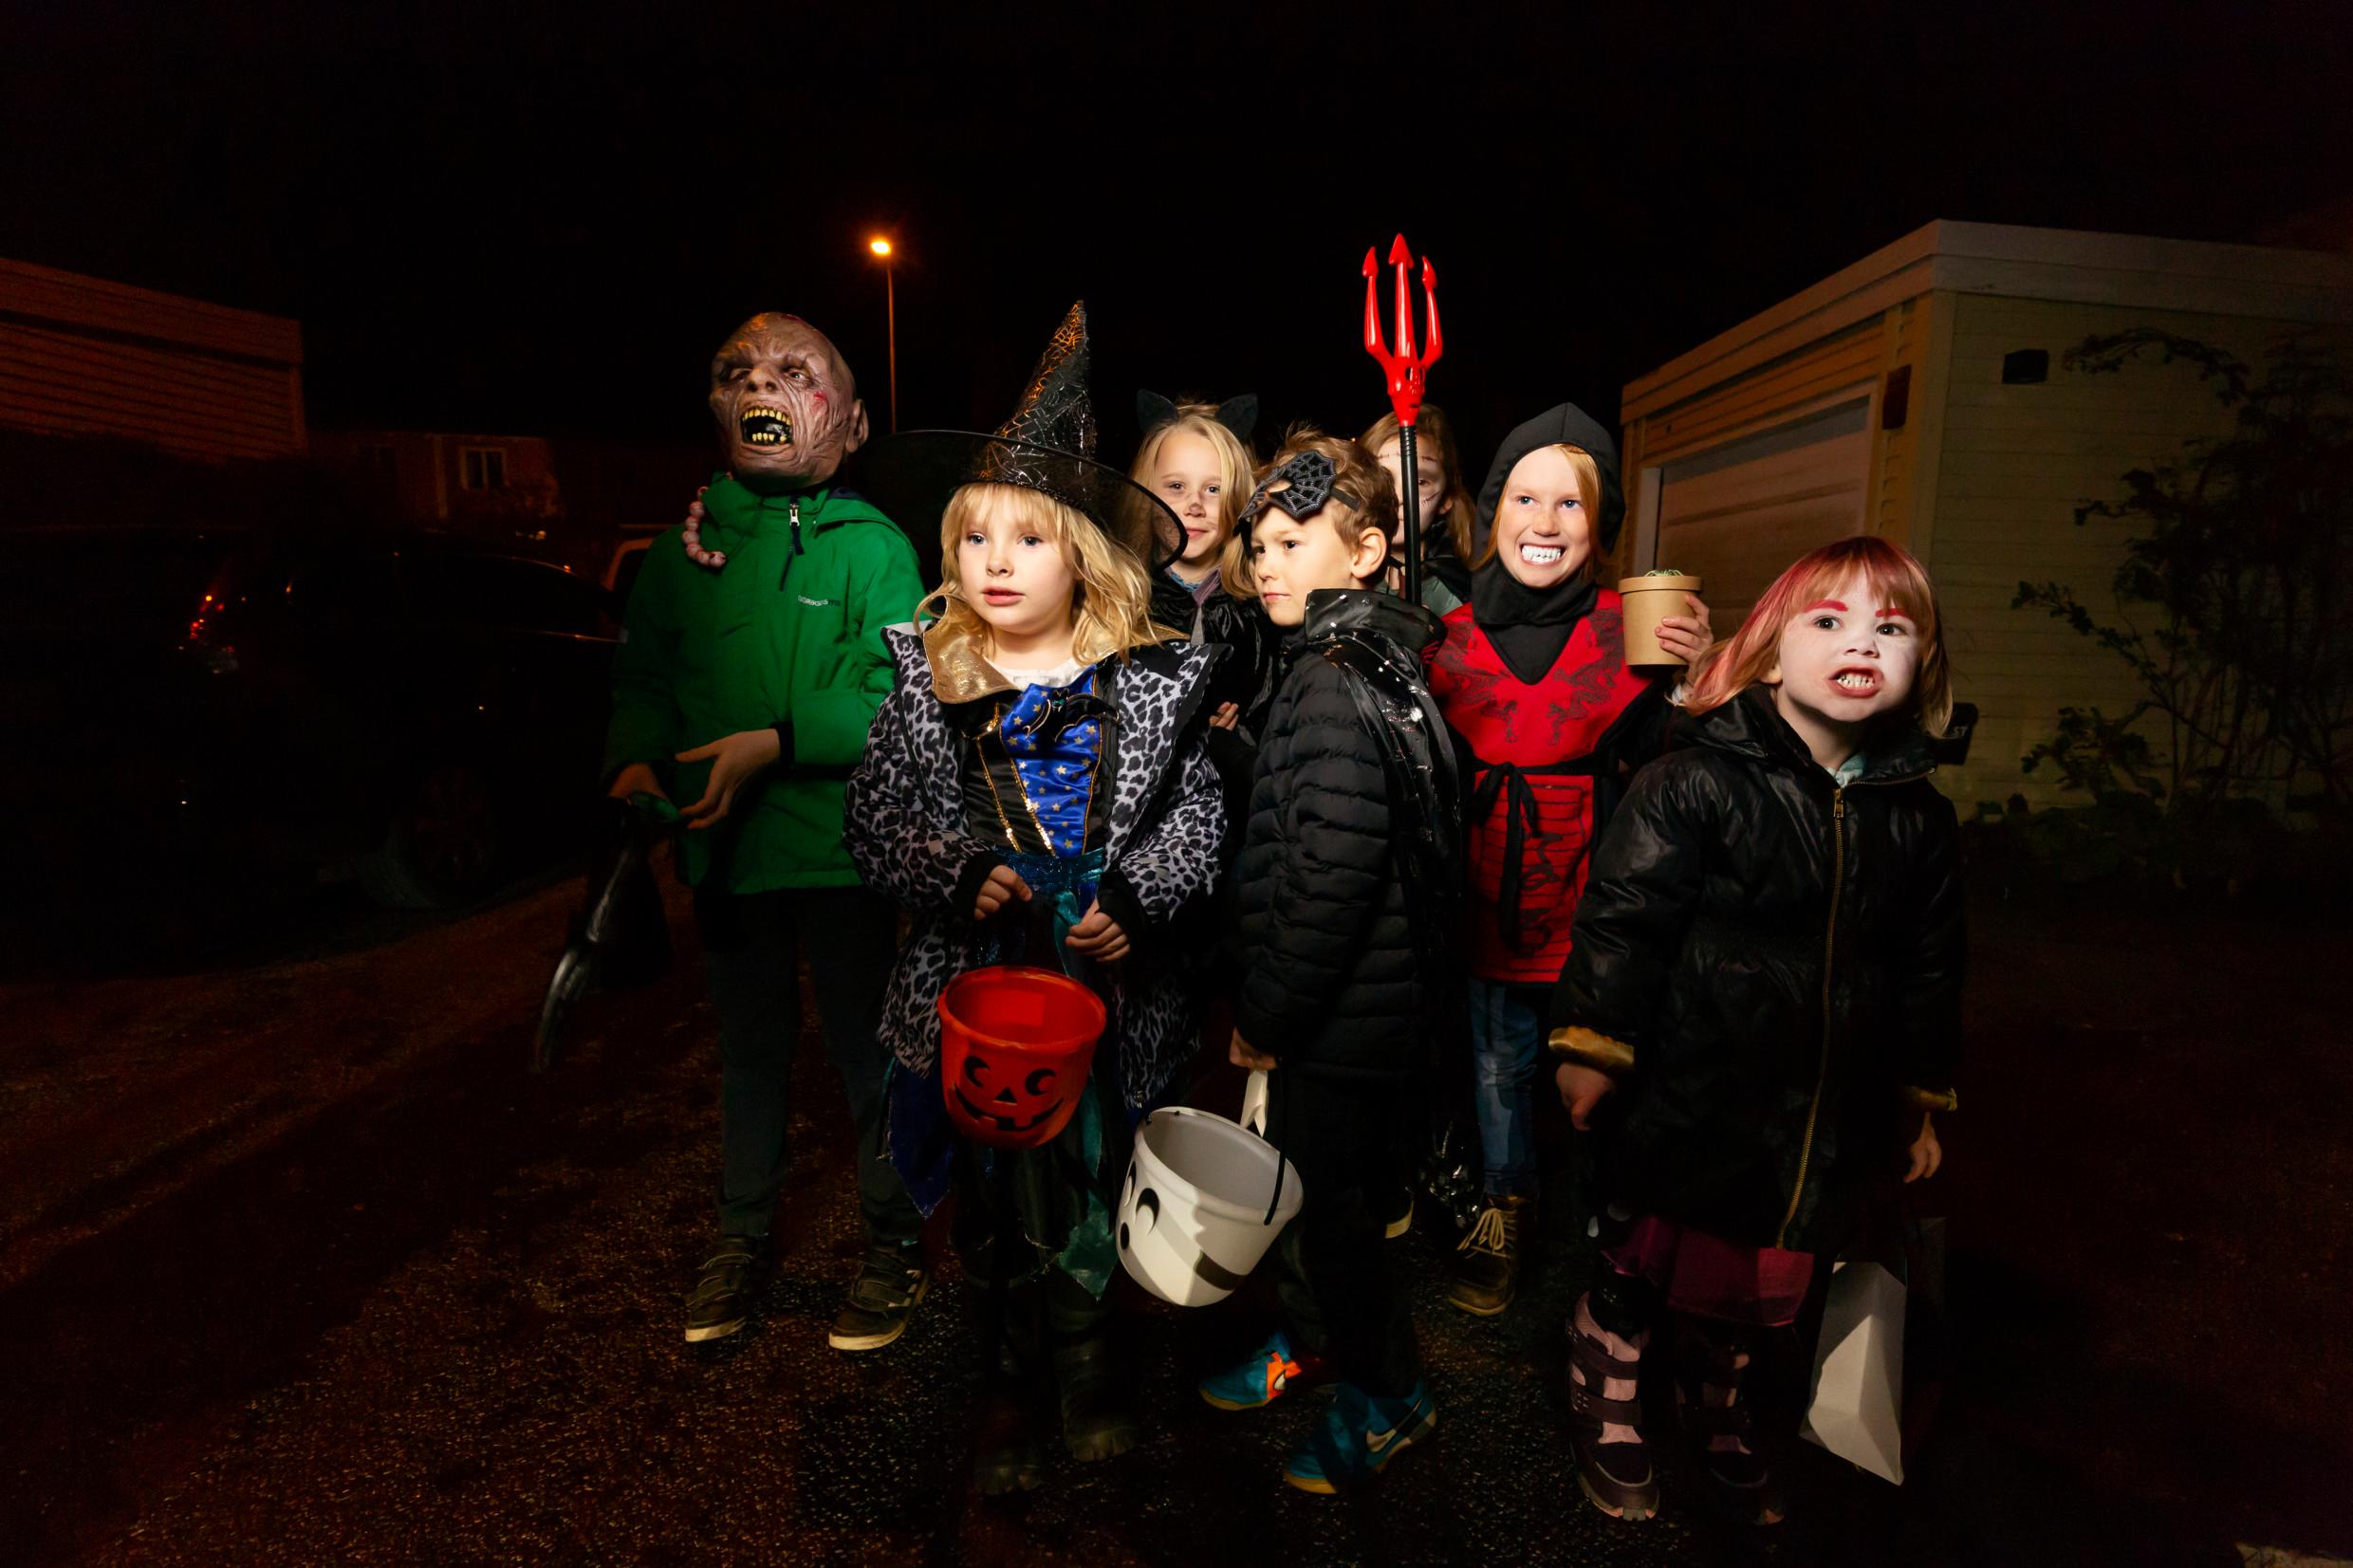 A group of children in costumes walking down a dark street.